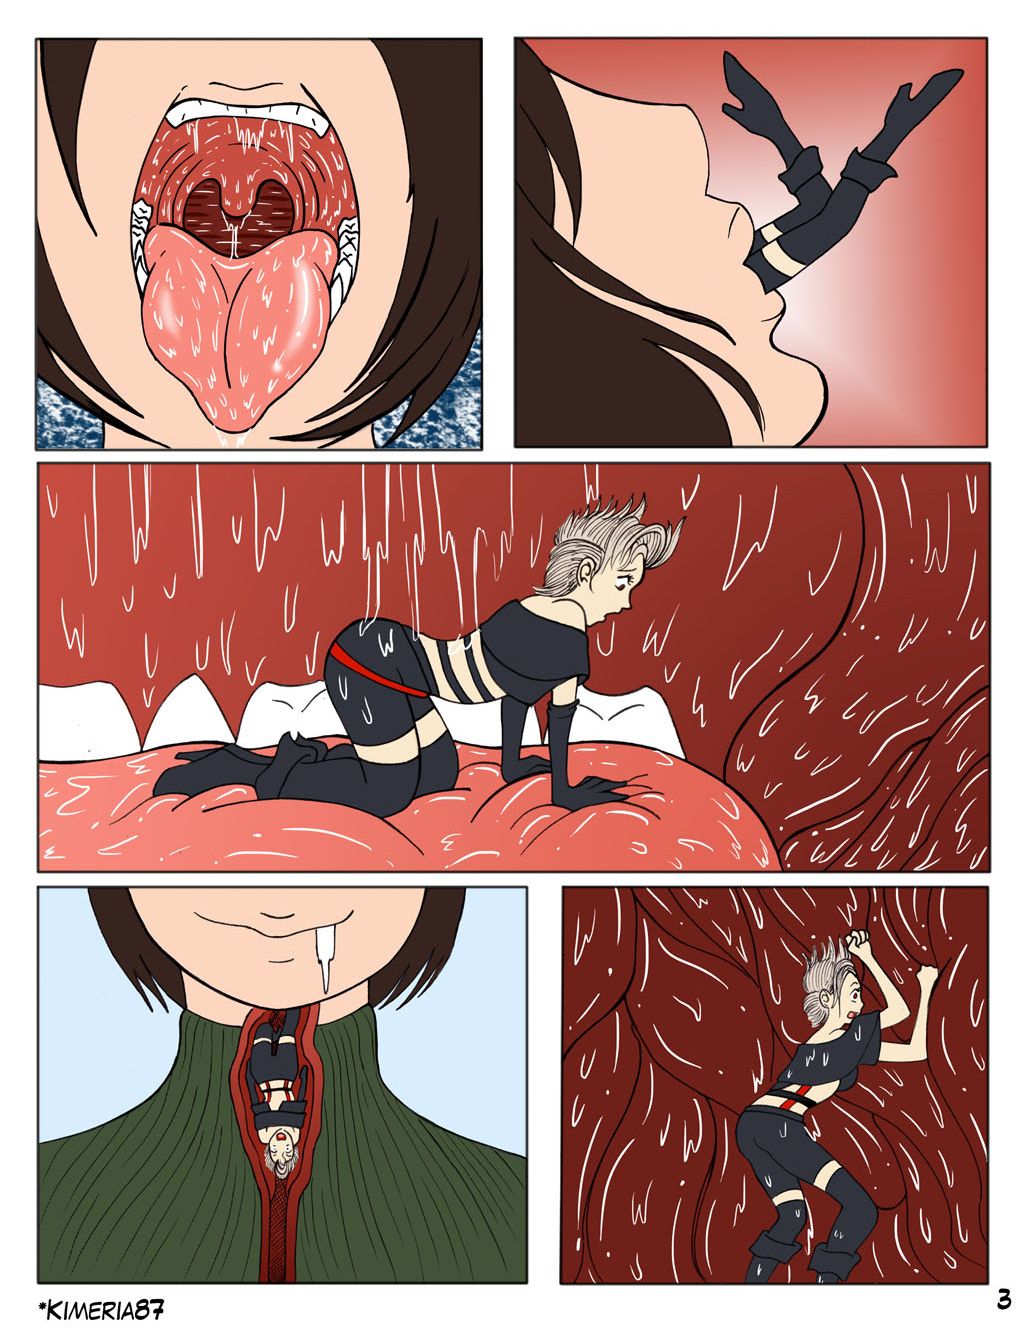 Full vore comic FF7 girls crash a party page 3 full.